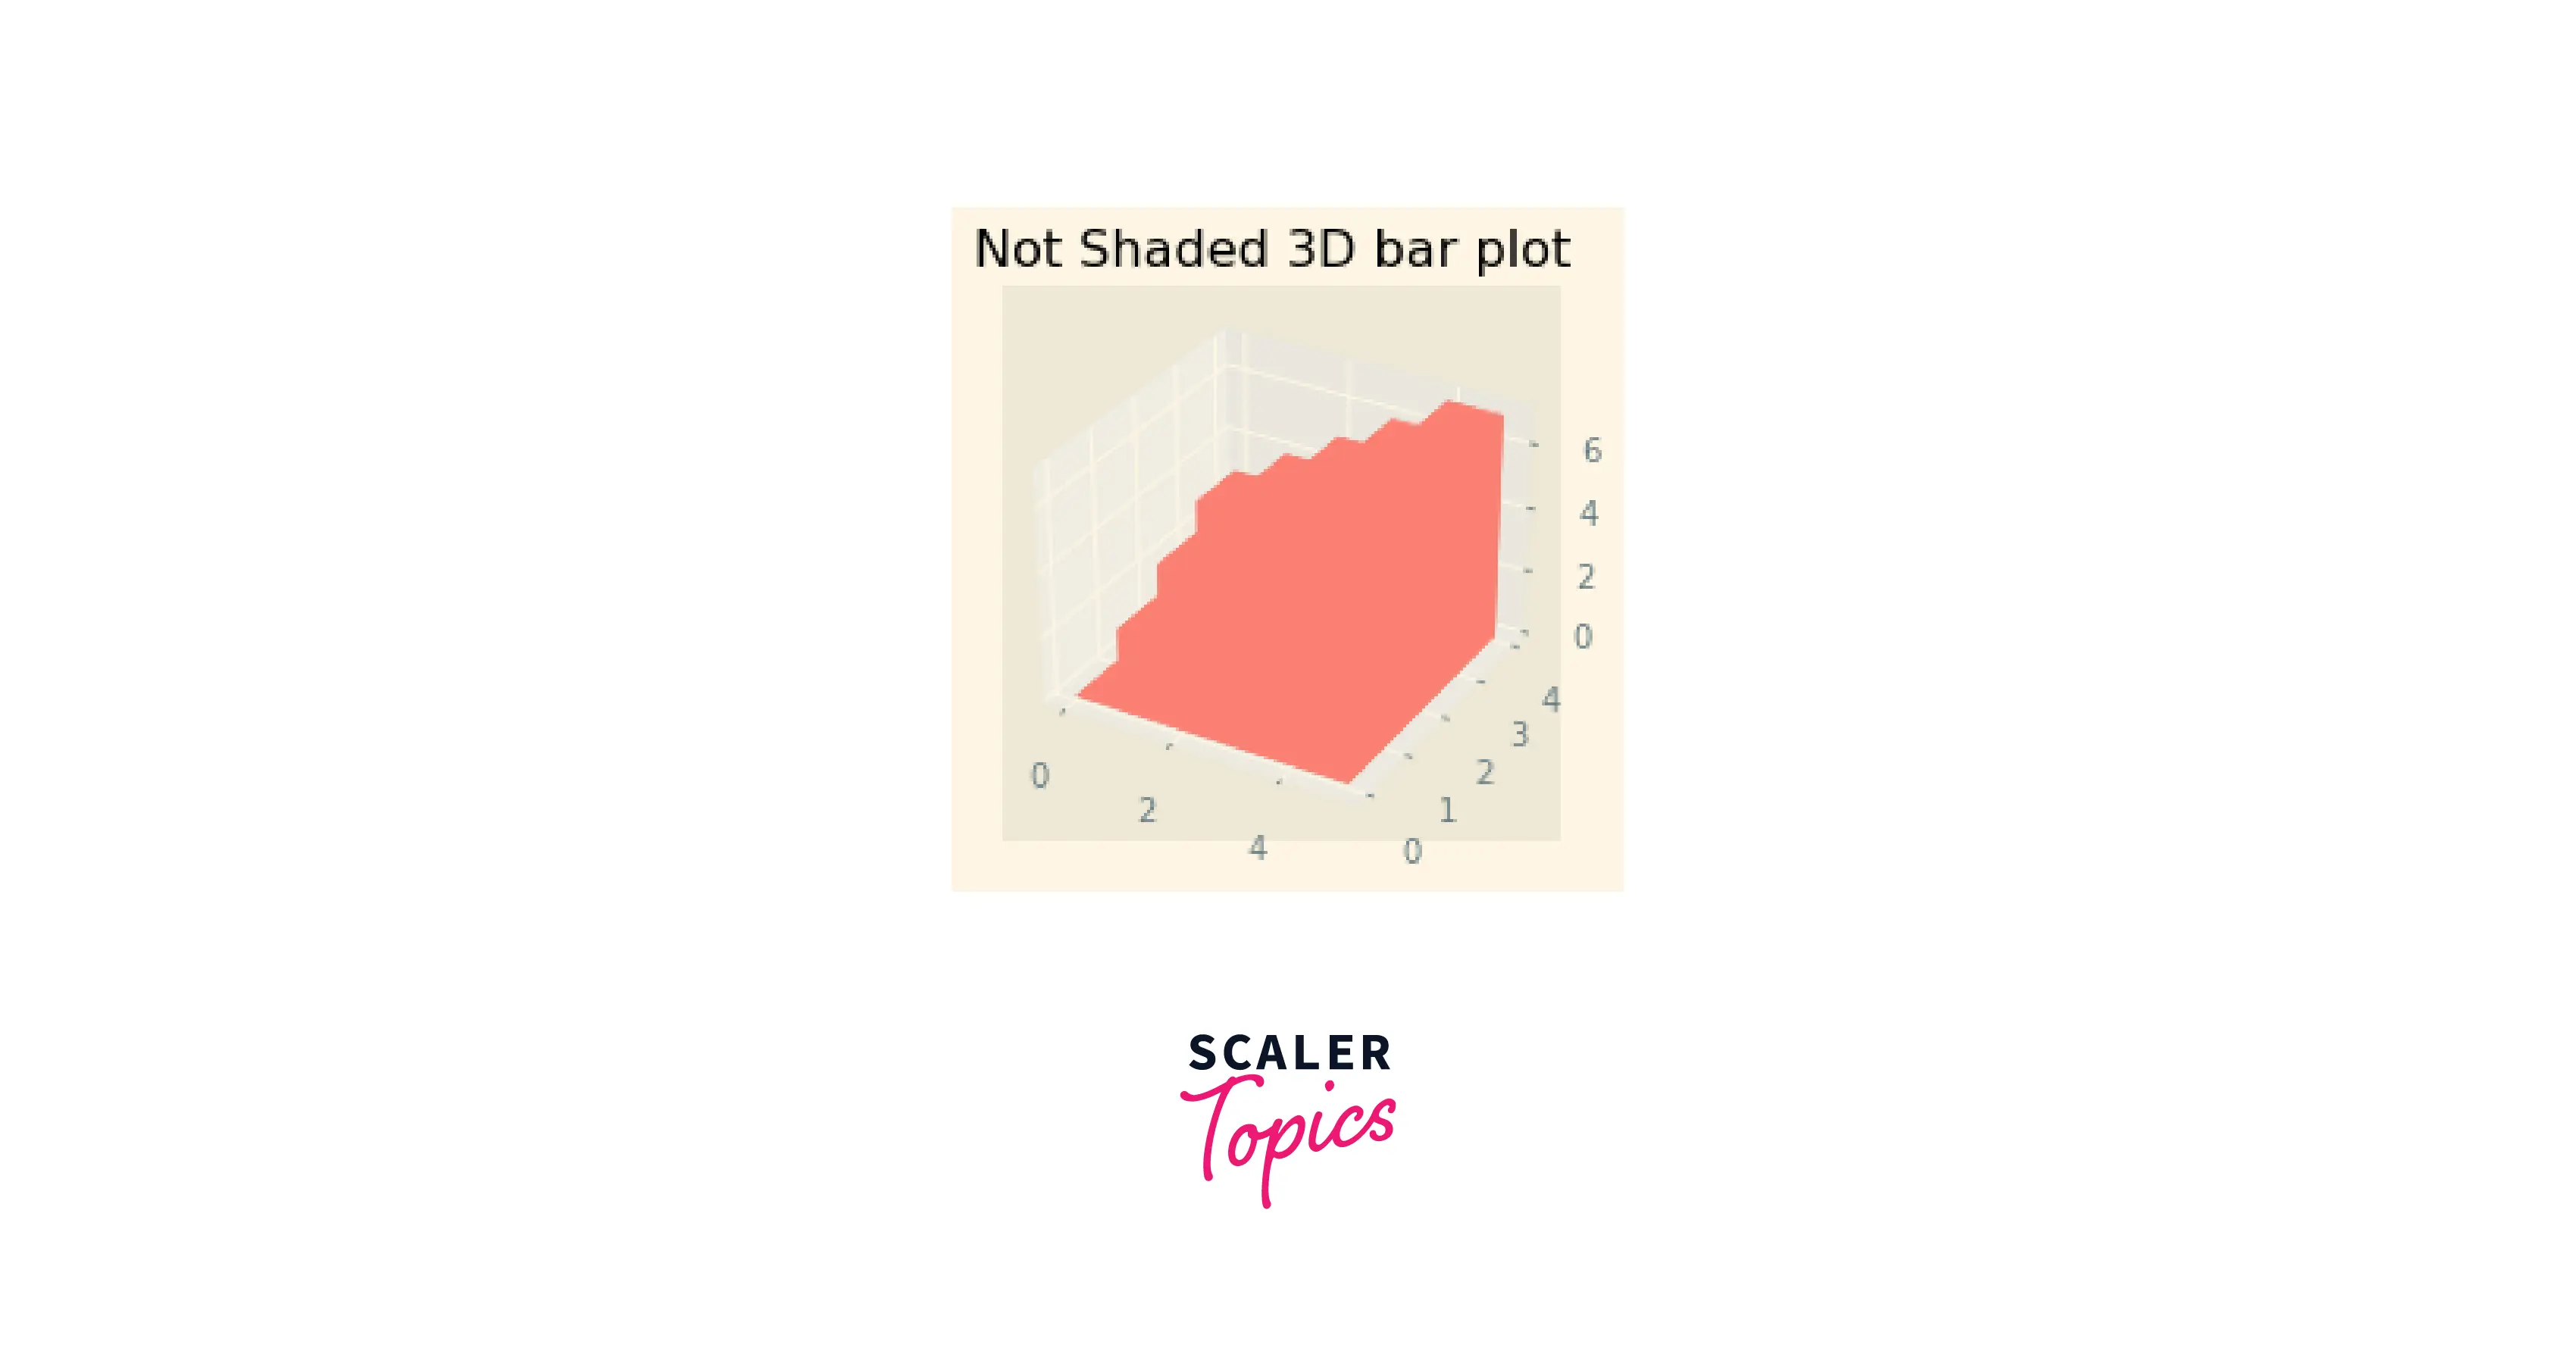 3d-bar-plot-without-shading